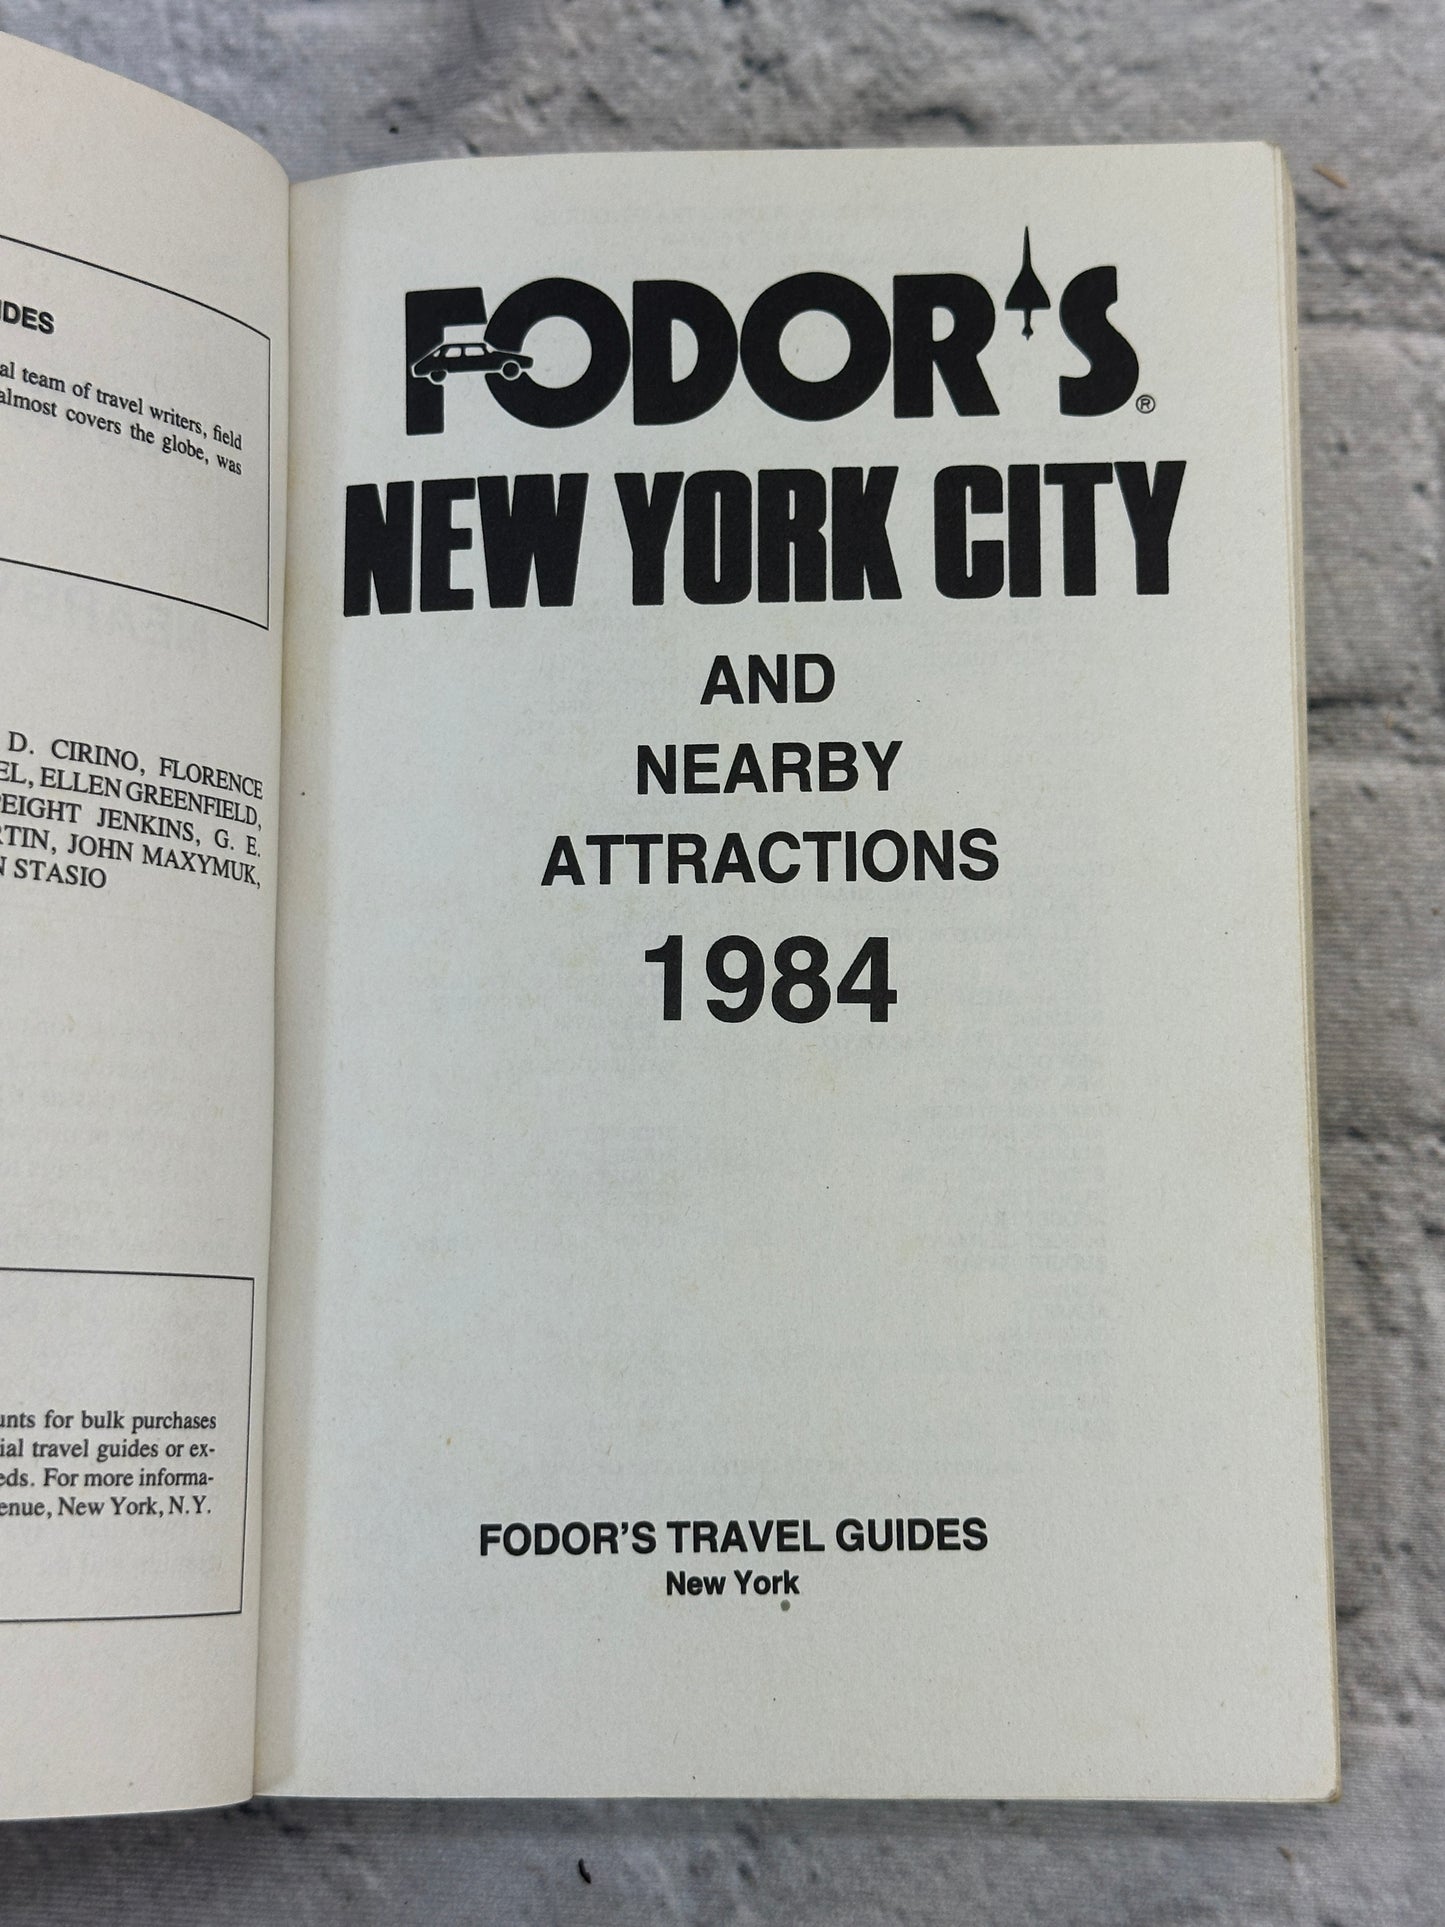 Fodor's New York City and Nearby Attractions [1984]